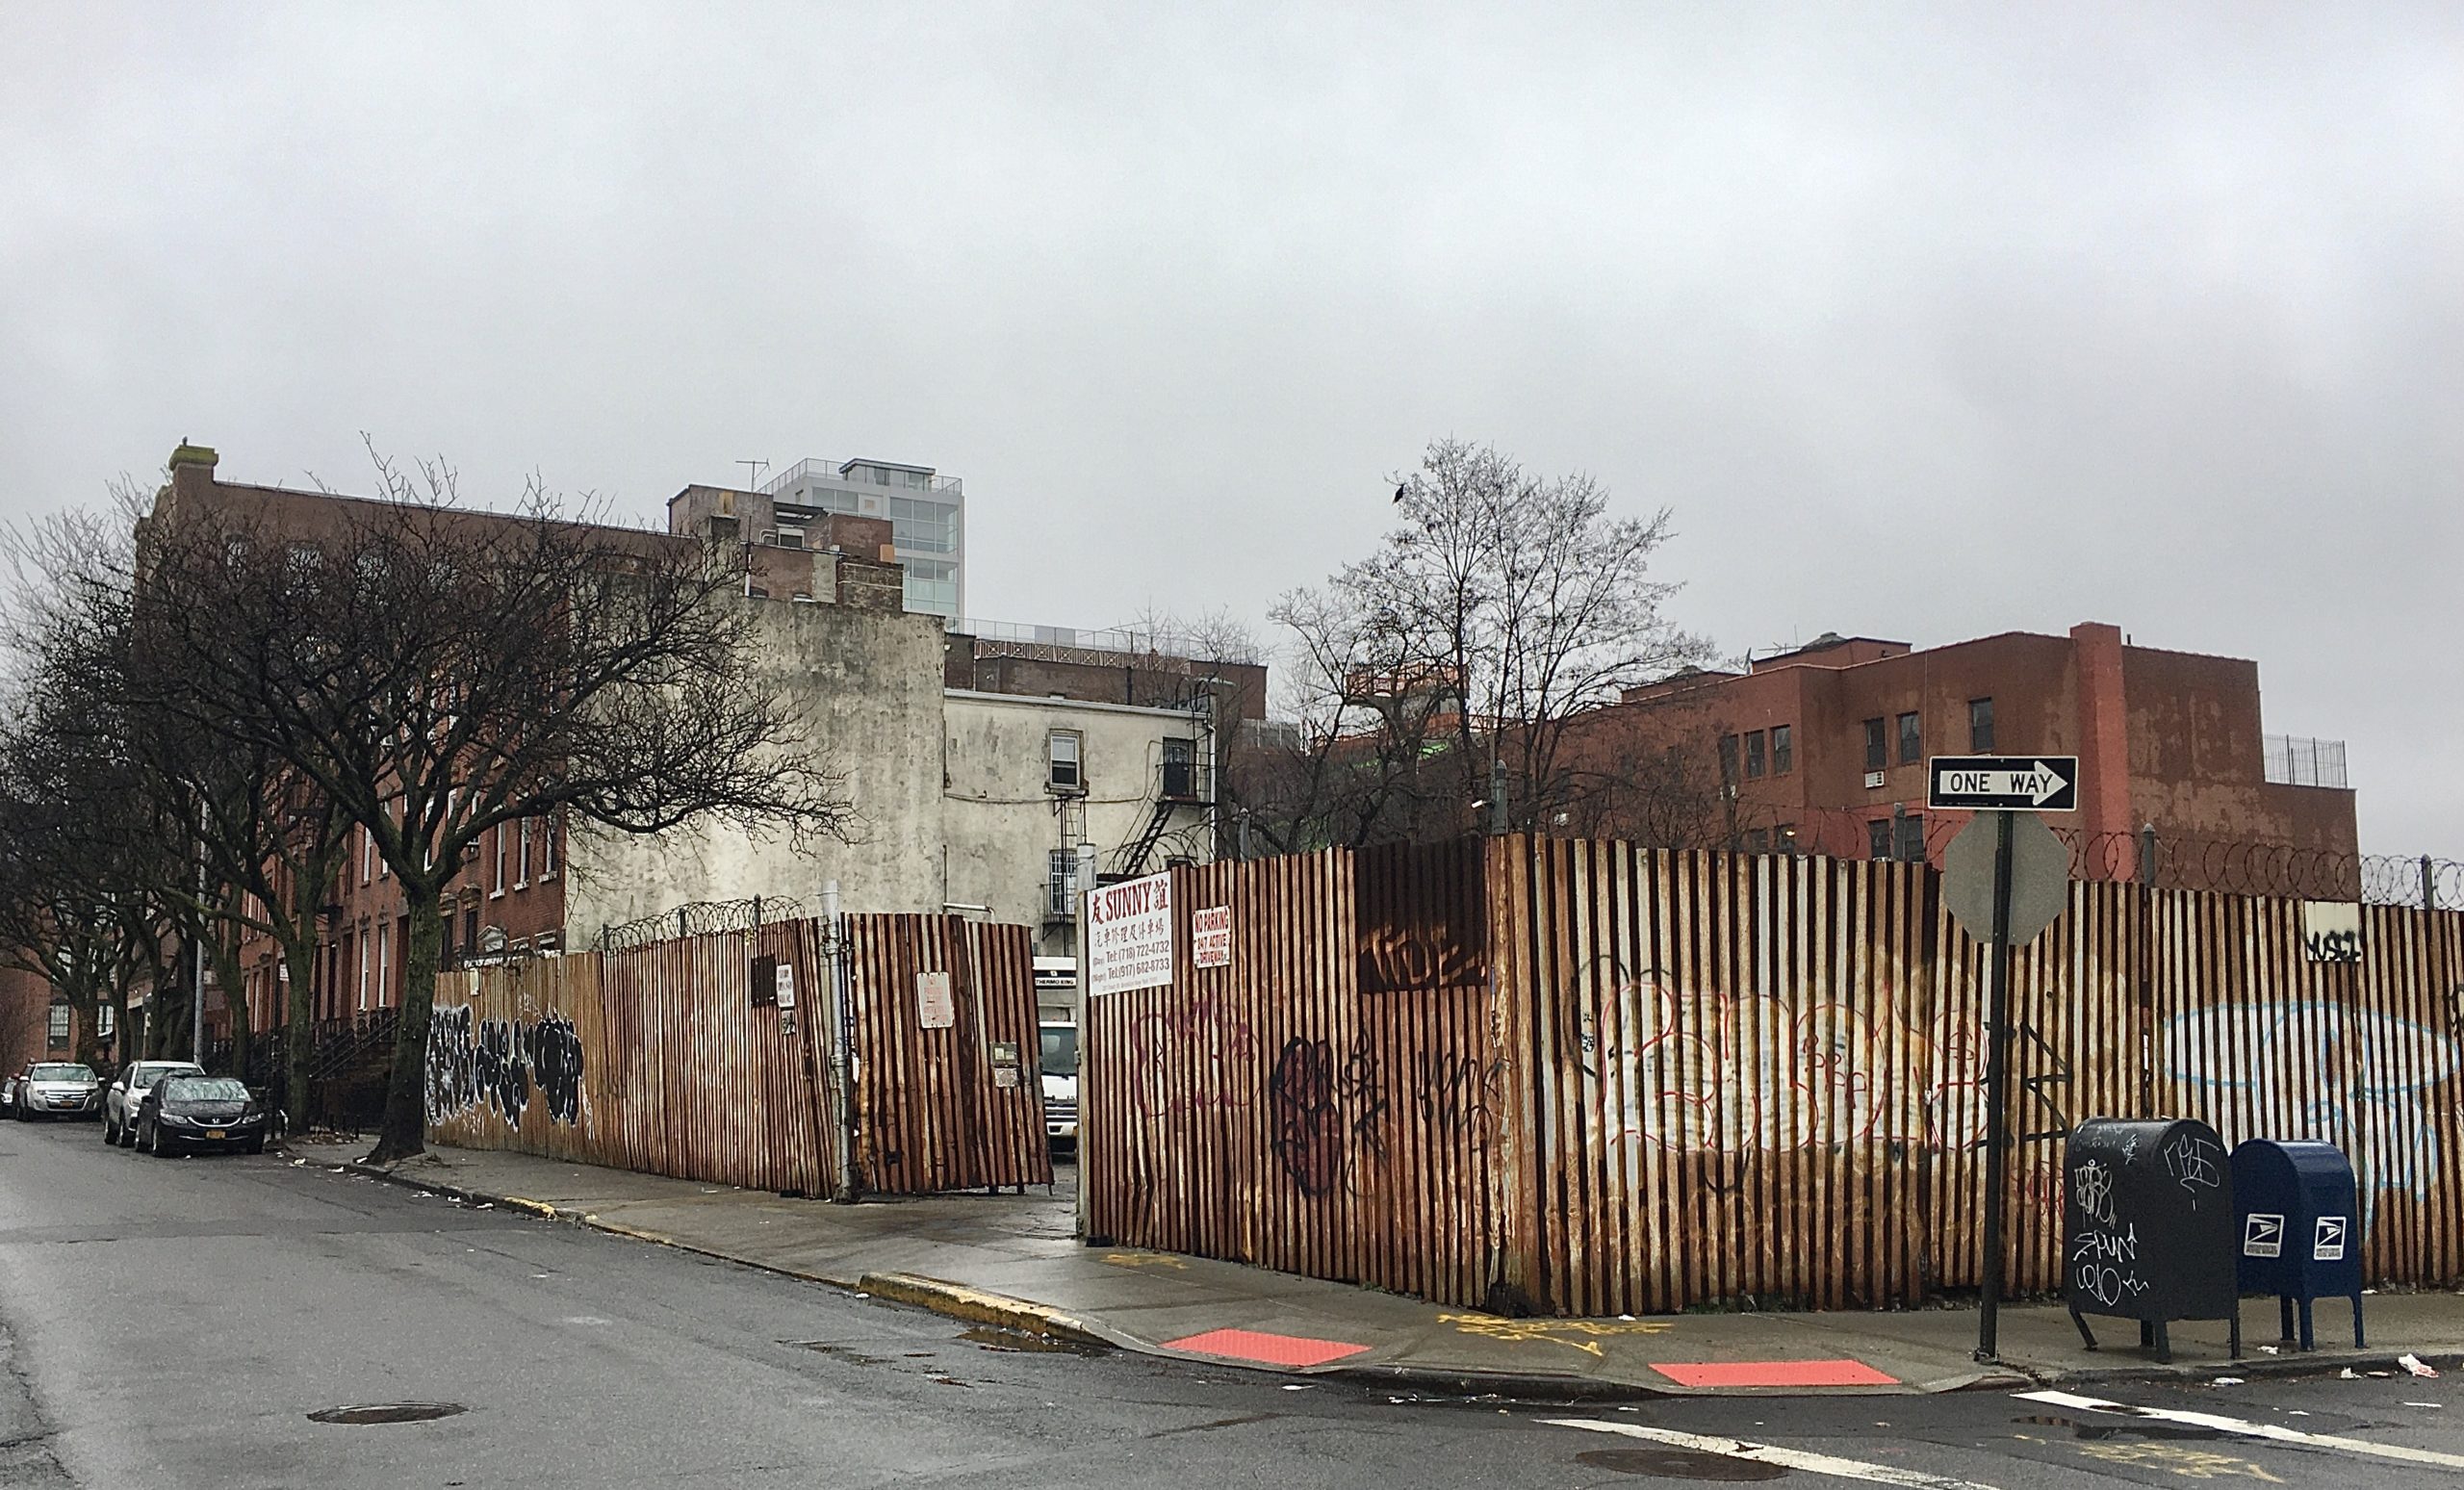 This fenced-in site is 251 Front St., where development is reportedly also planned. Photo: Lore Croghan/Brooklyn Eagle